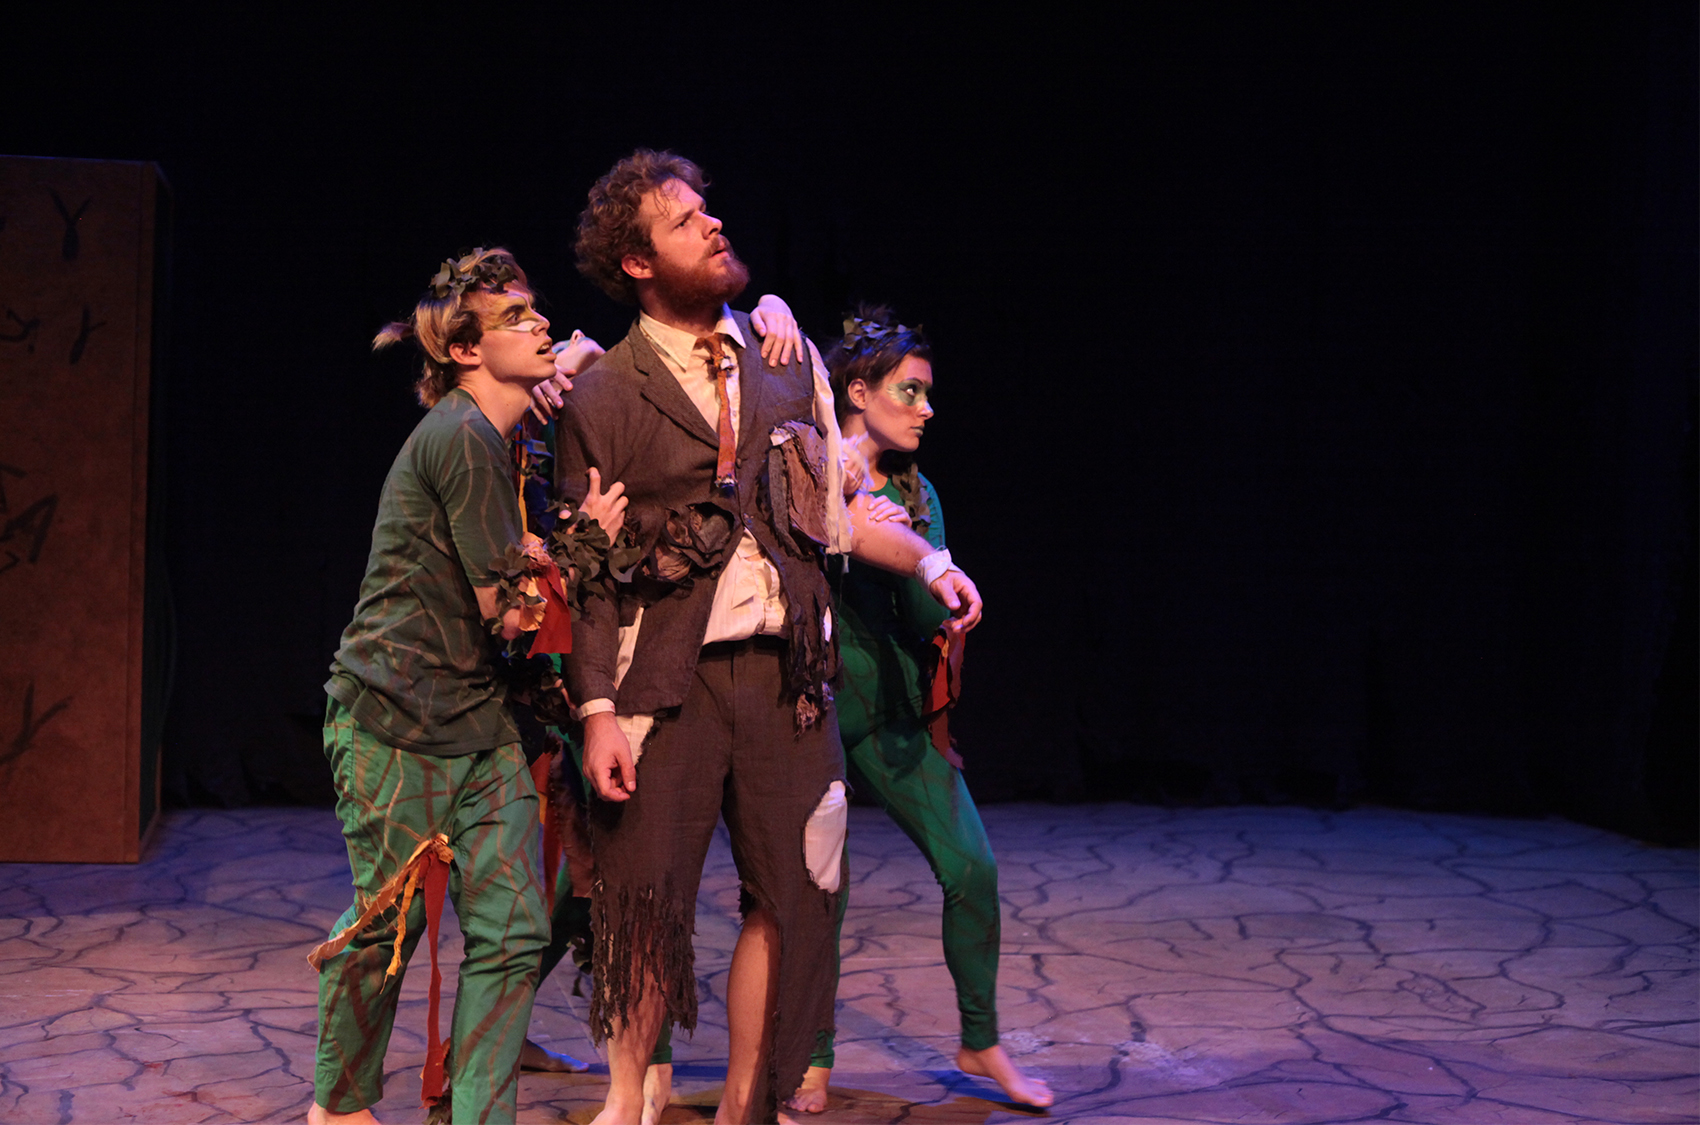 Two figures (one young man and one young woman) dressed in colorful green clothing, feathers and miscellaneous items scattered on their form and in their hair stand side by side against a man with a rugged beard in a tattered suit. The three of them are tensed, anticipating whatever might be coming from off-screen.  